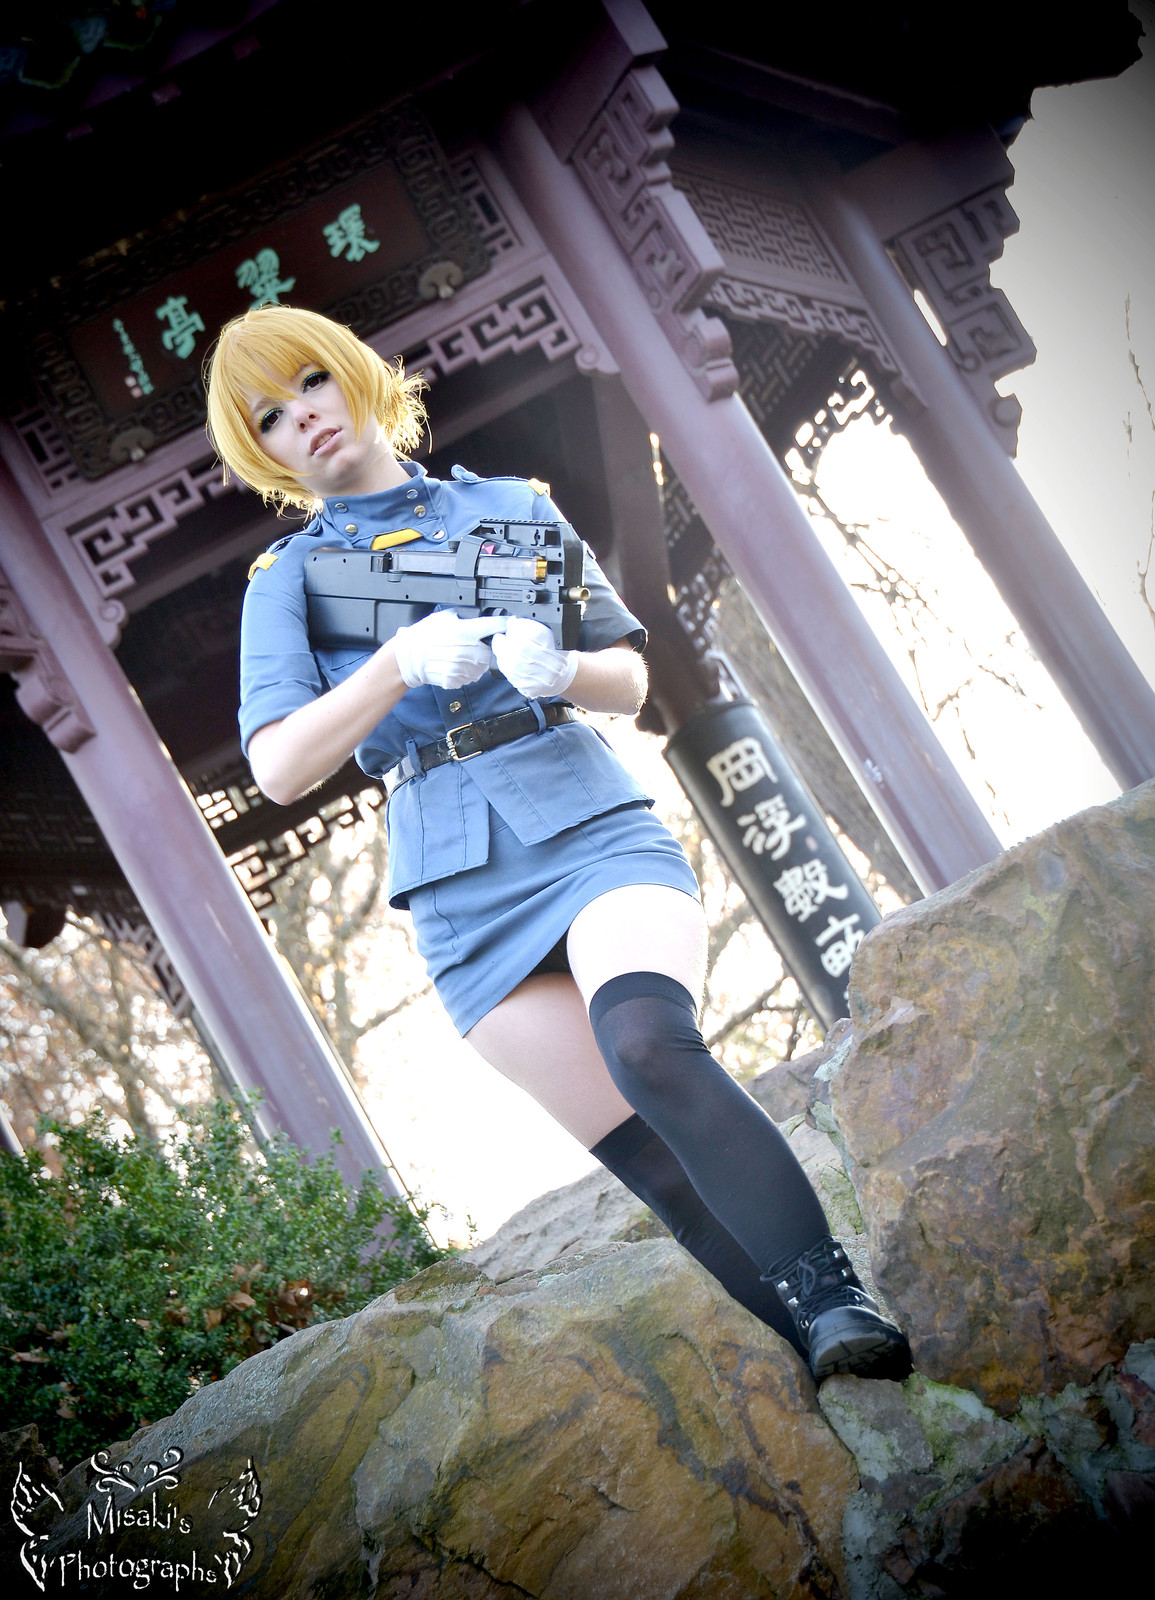 Seras Victoria - Hellsing / Cosplayer GeniMonster / Photographer TaigaArts - CC-BY-NC